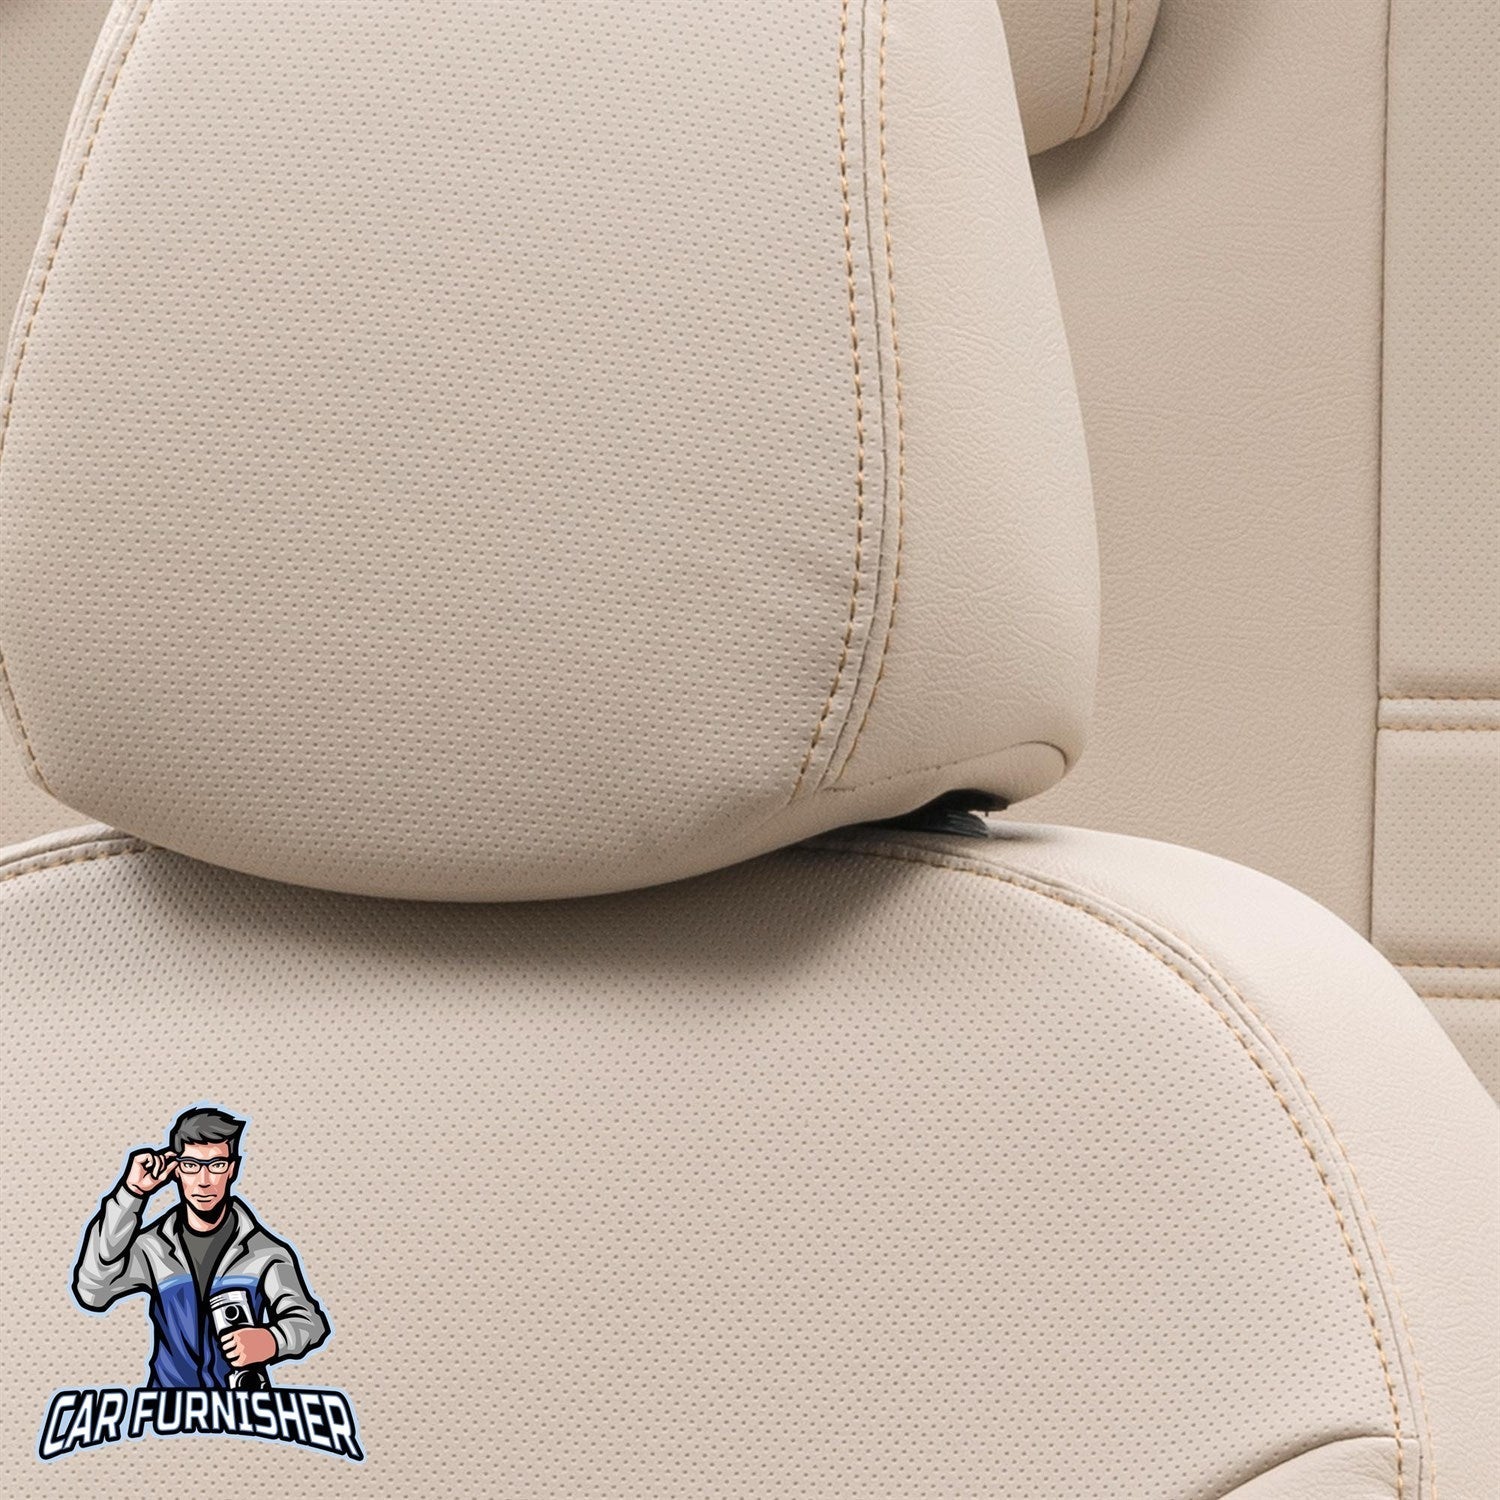 Renault Talisman Seat Covers Istanbul Leather Design Beige Leather